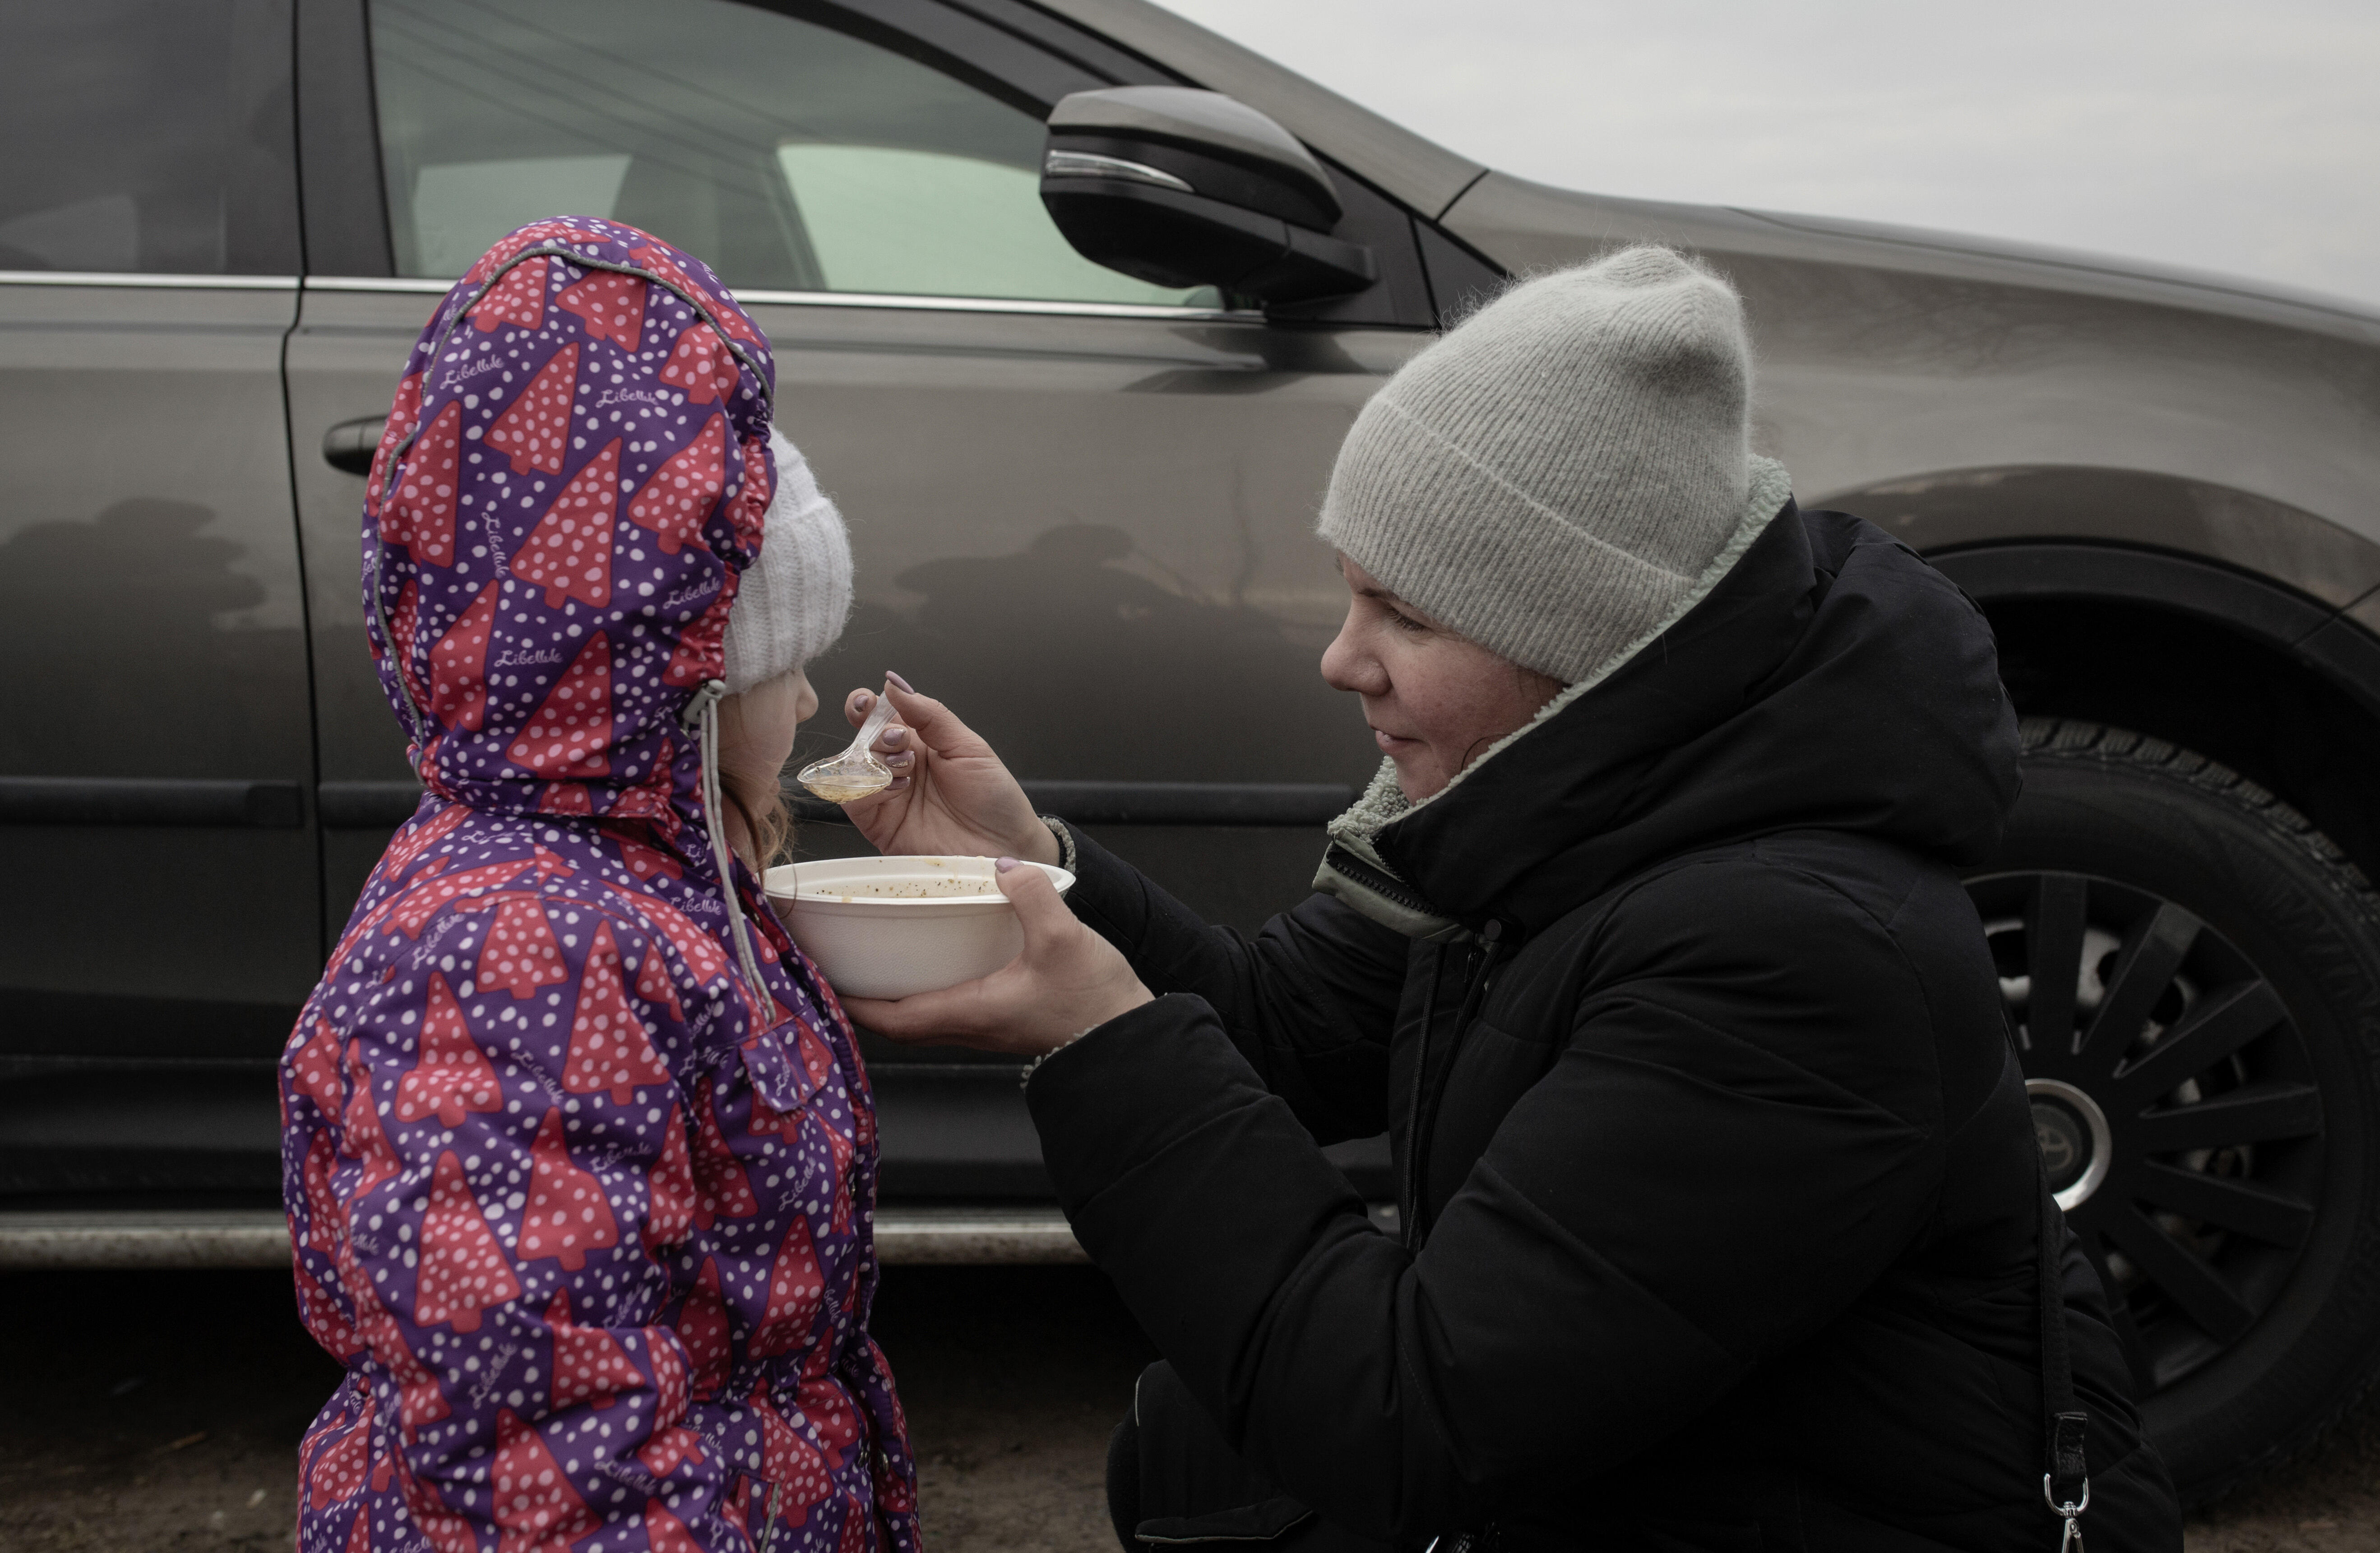 Dressed in winter clothes, a mother kneels down outside to feed her young daughter. 